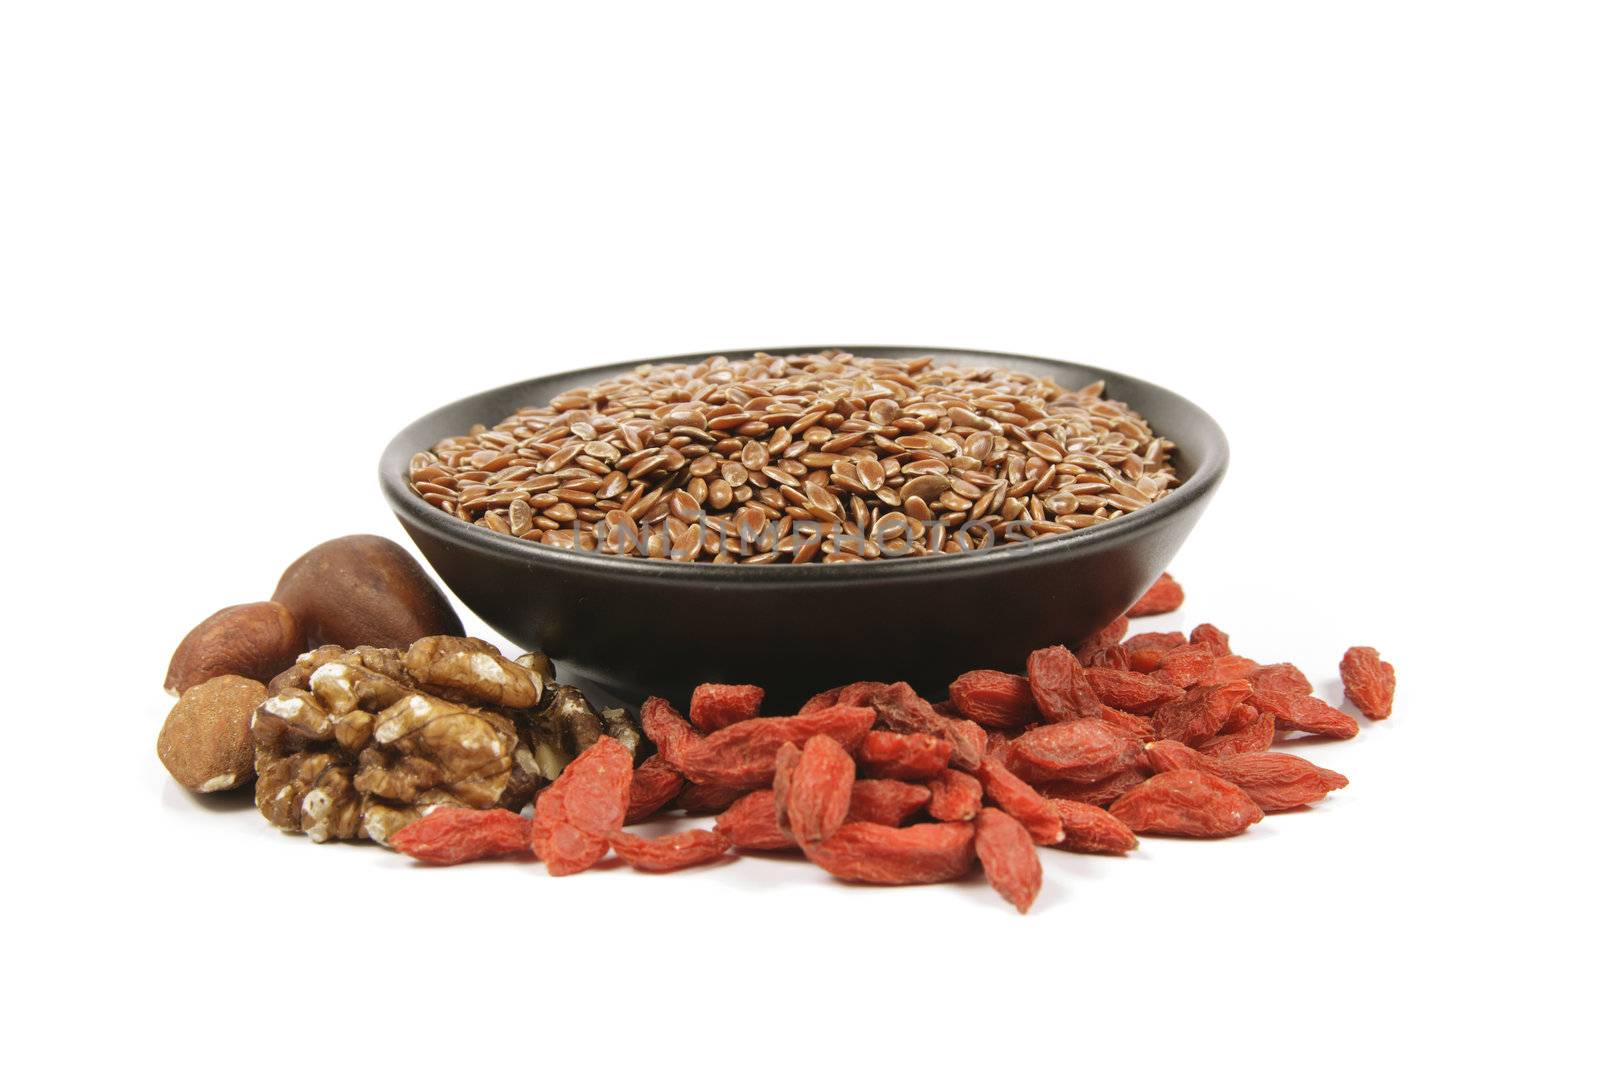 Linseed in a Bowl with Nuts and Goji Berries by KeithWilson